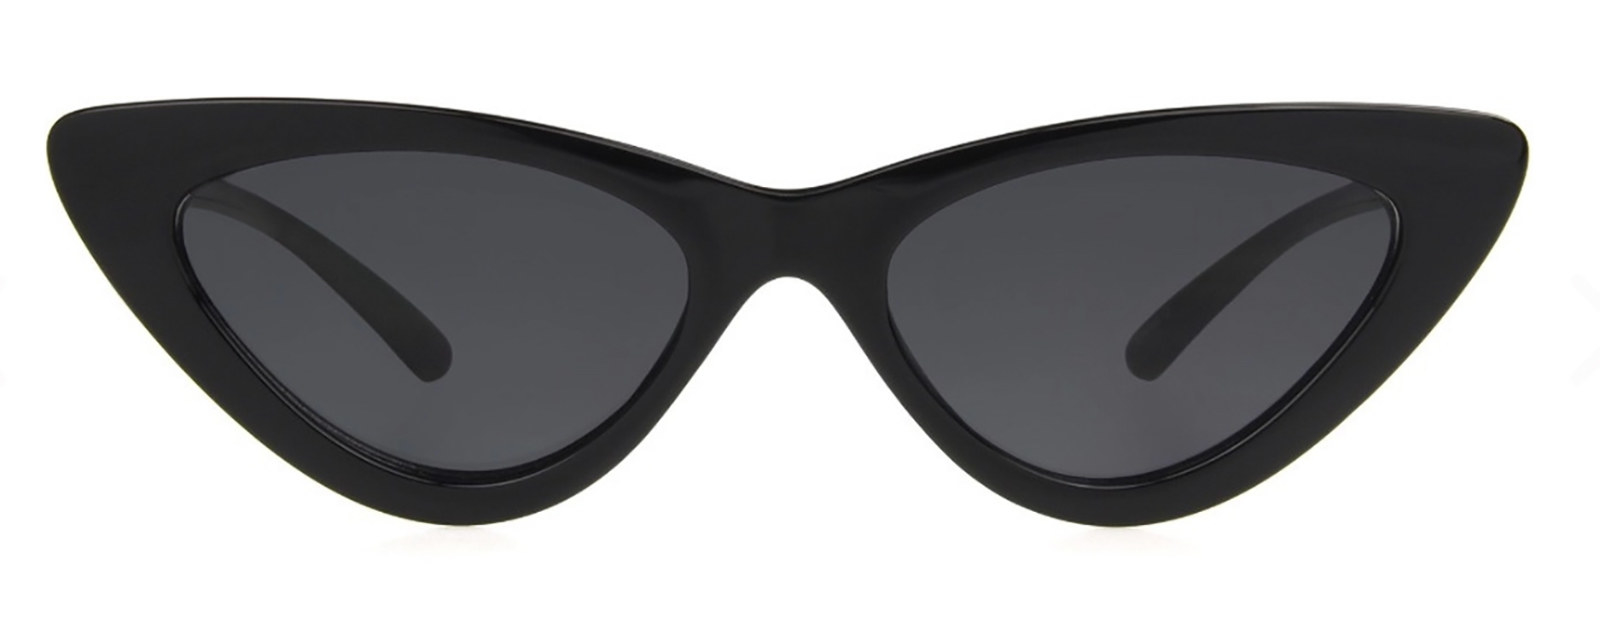 An image of Foster Grant Ivy sunglasses